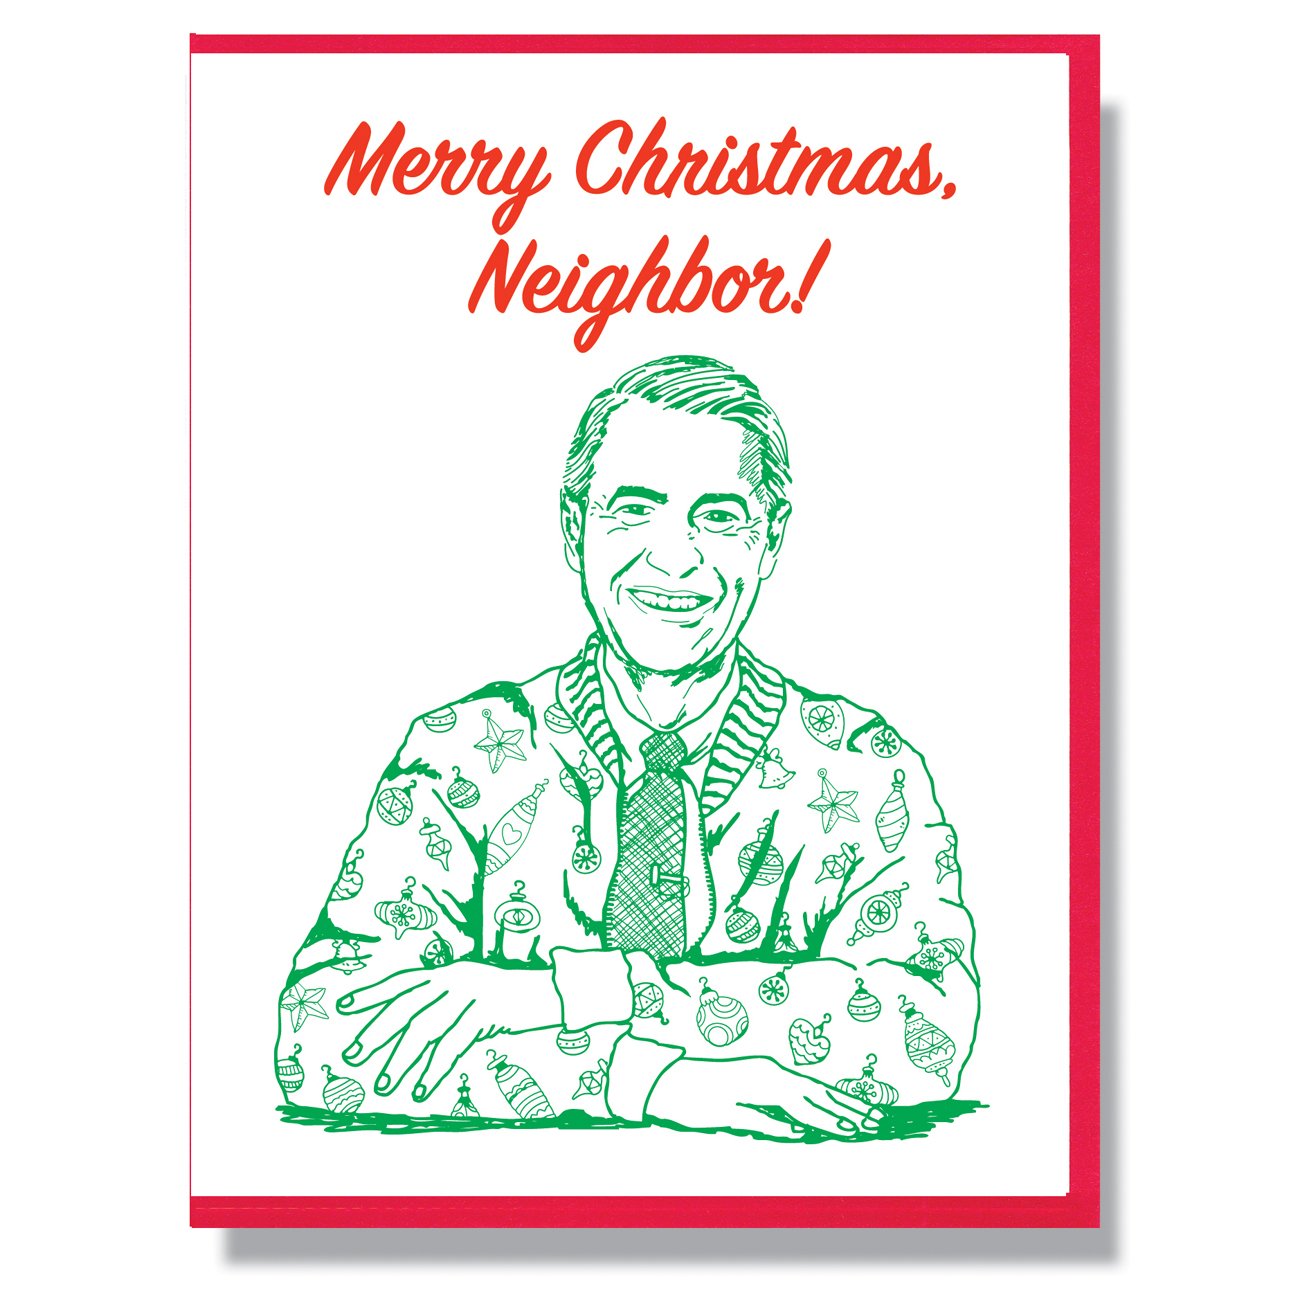 RIP Fred Rogers Christmas Card